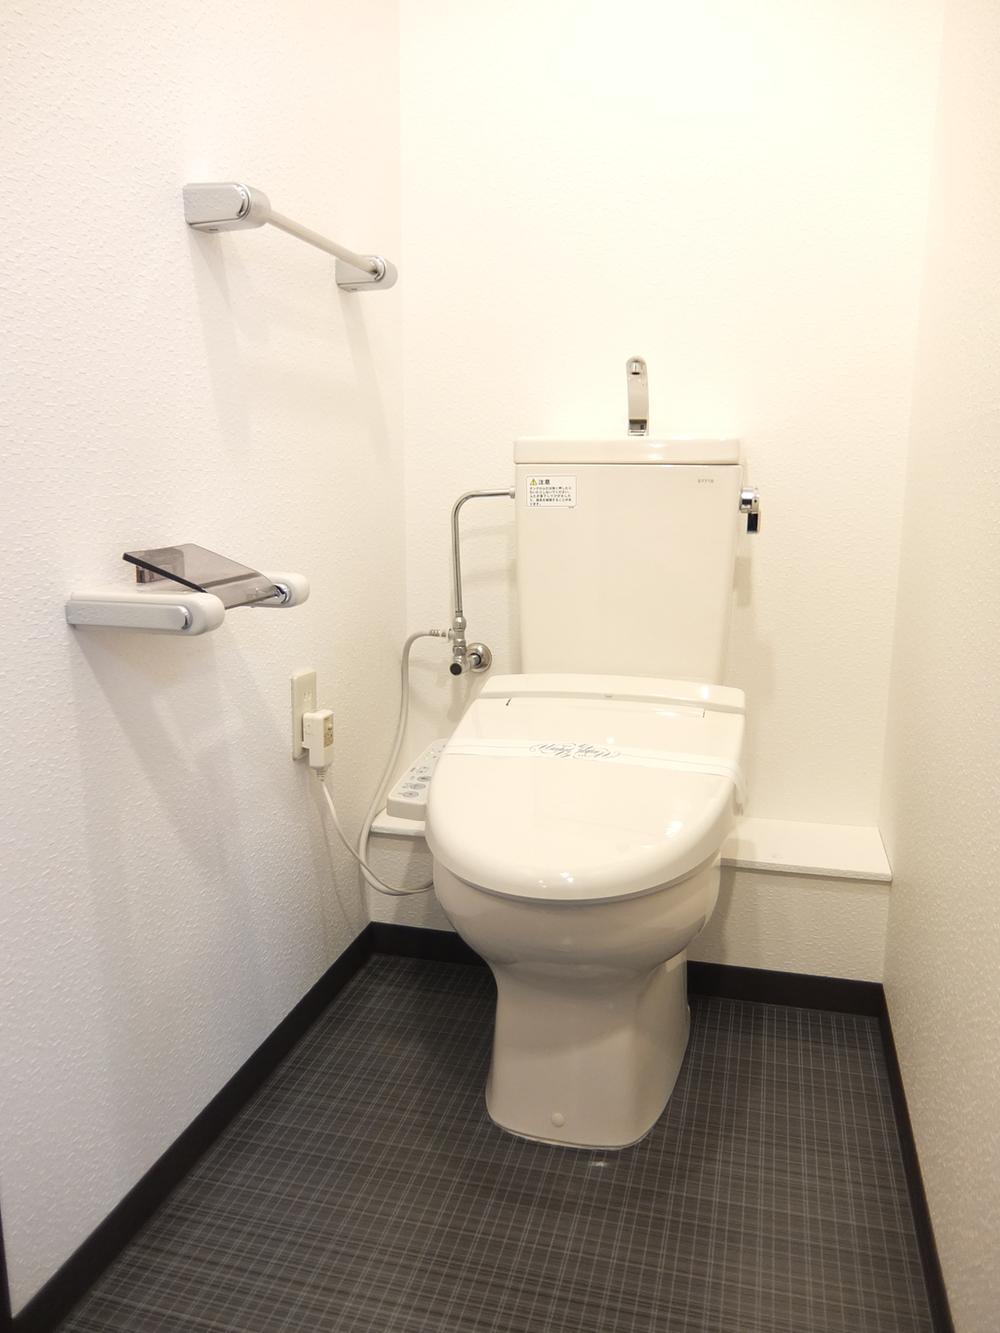 Toilet. Here also renovation completed